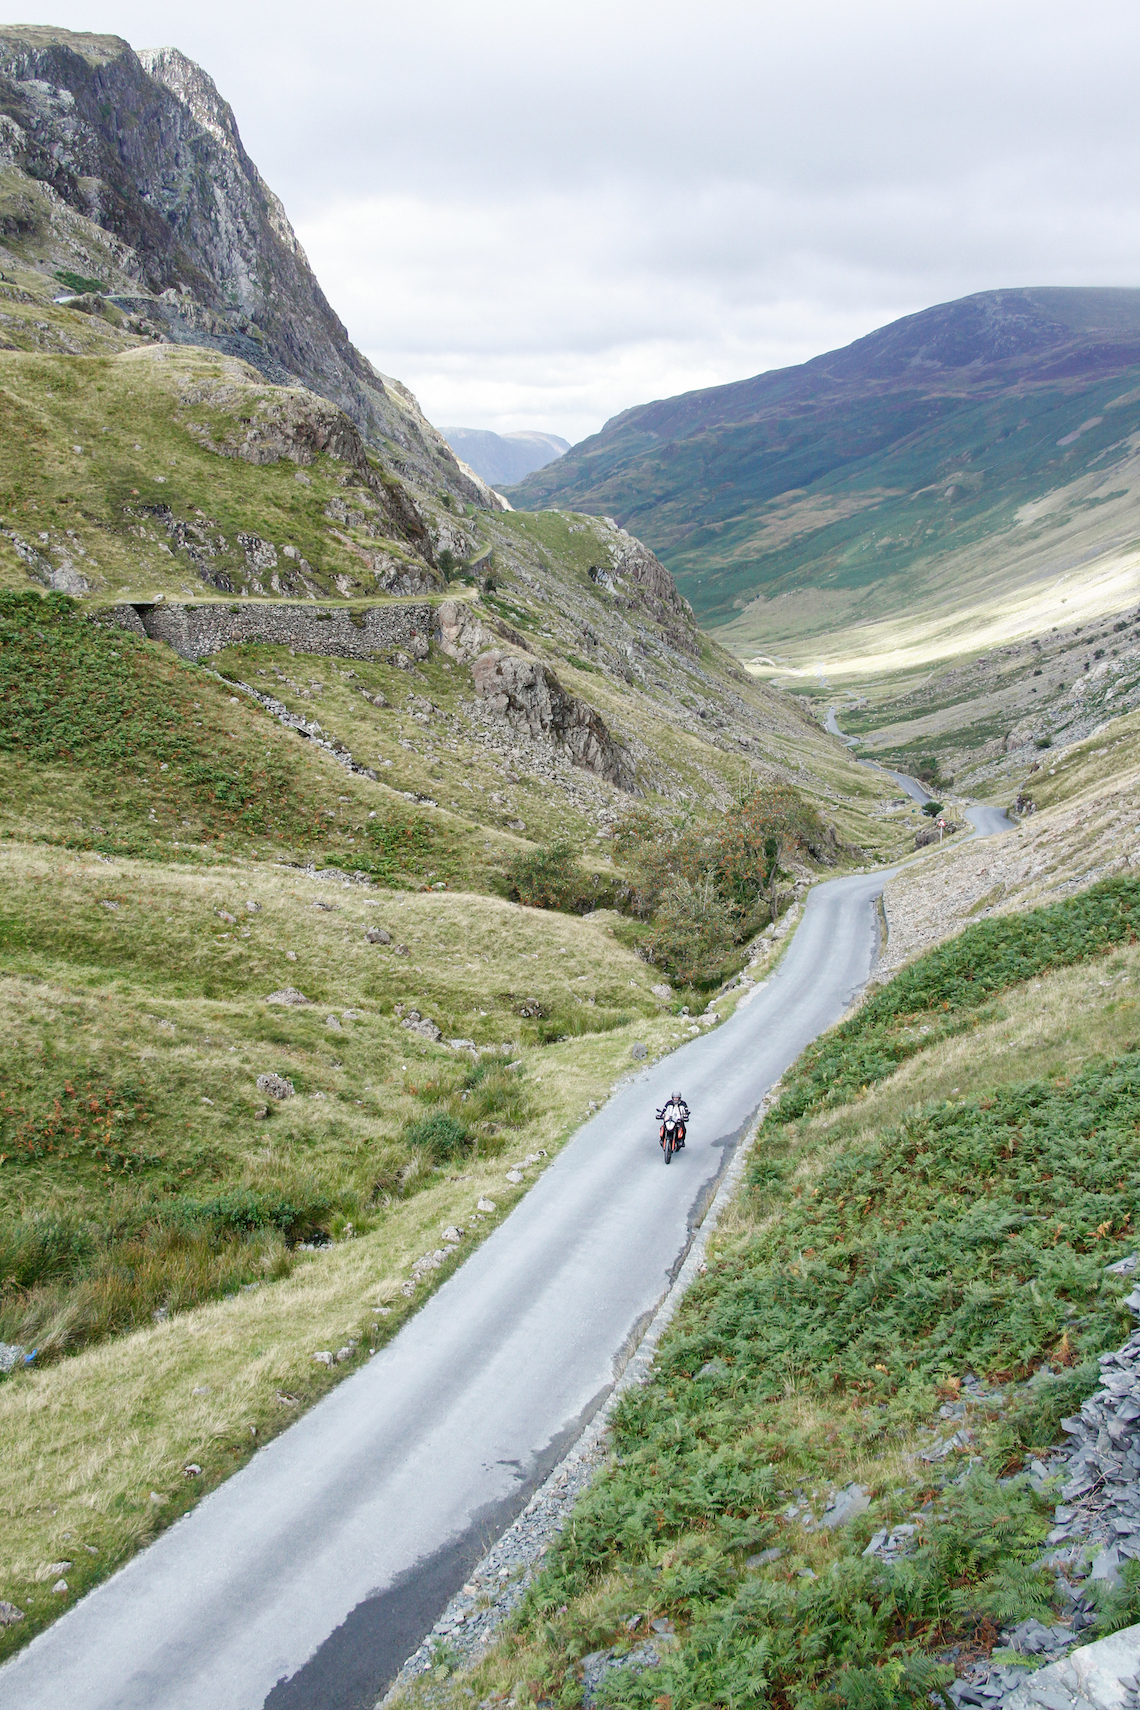 KTM 890 Adventure on the Honister Pass in the Lake District